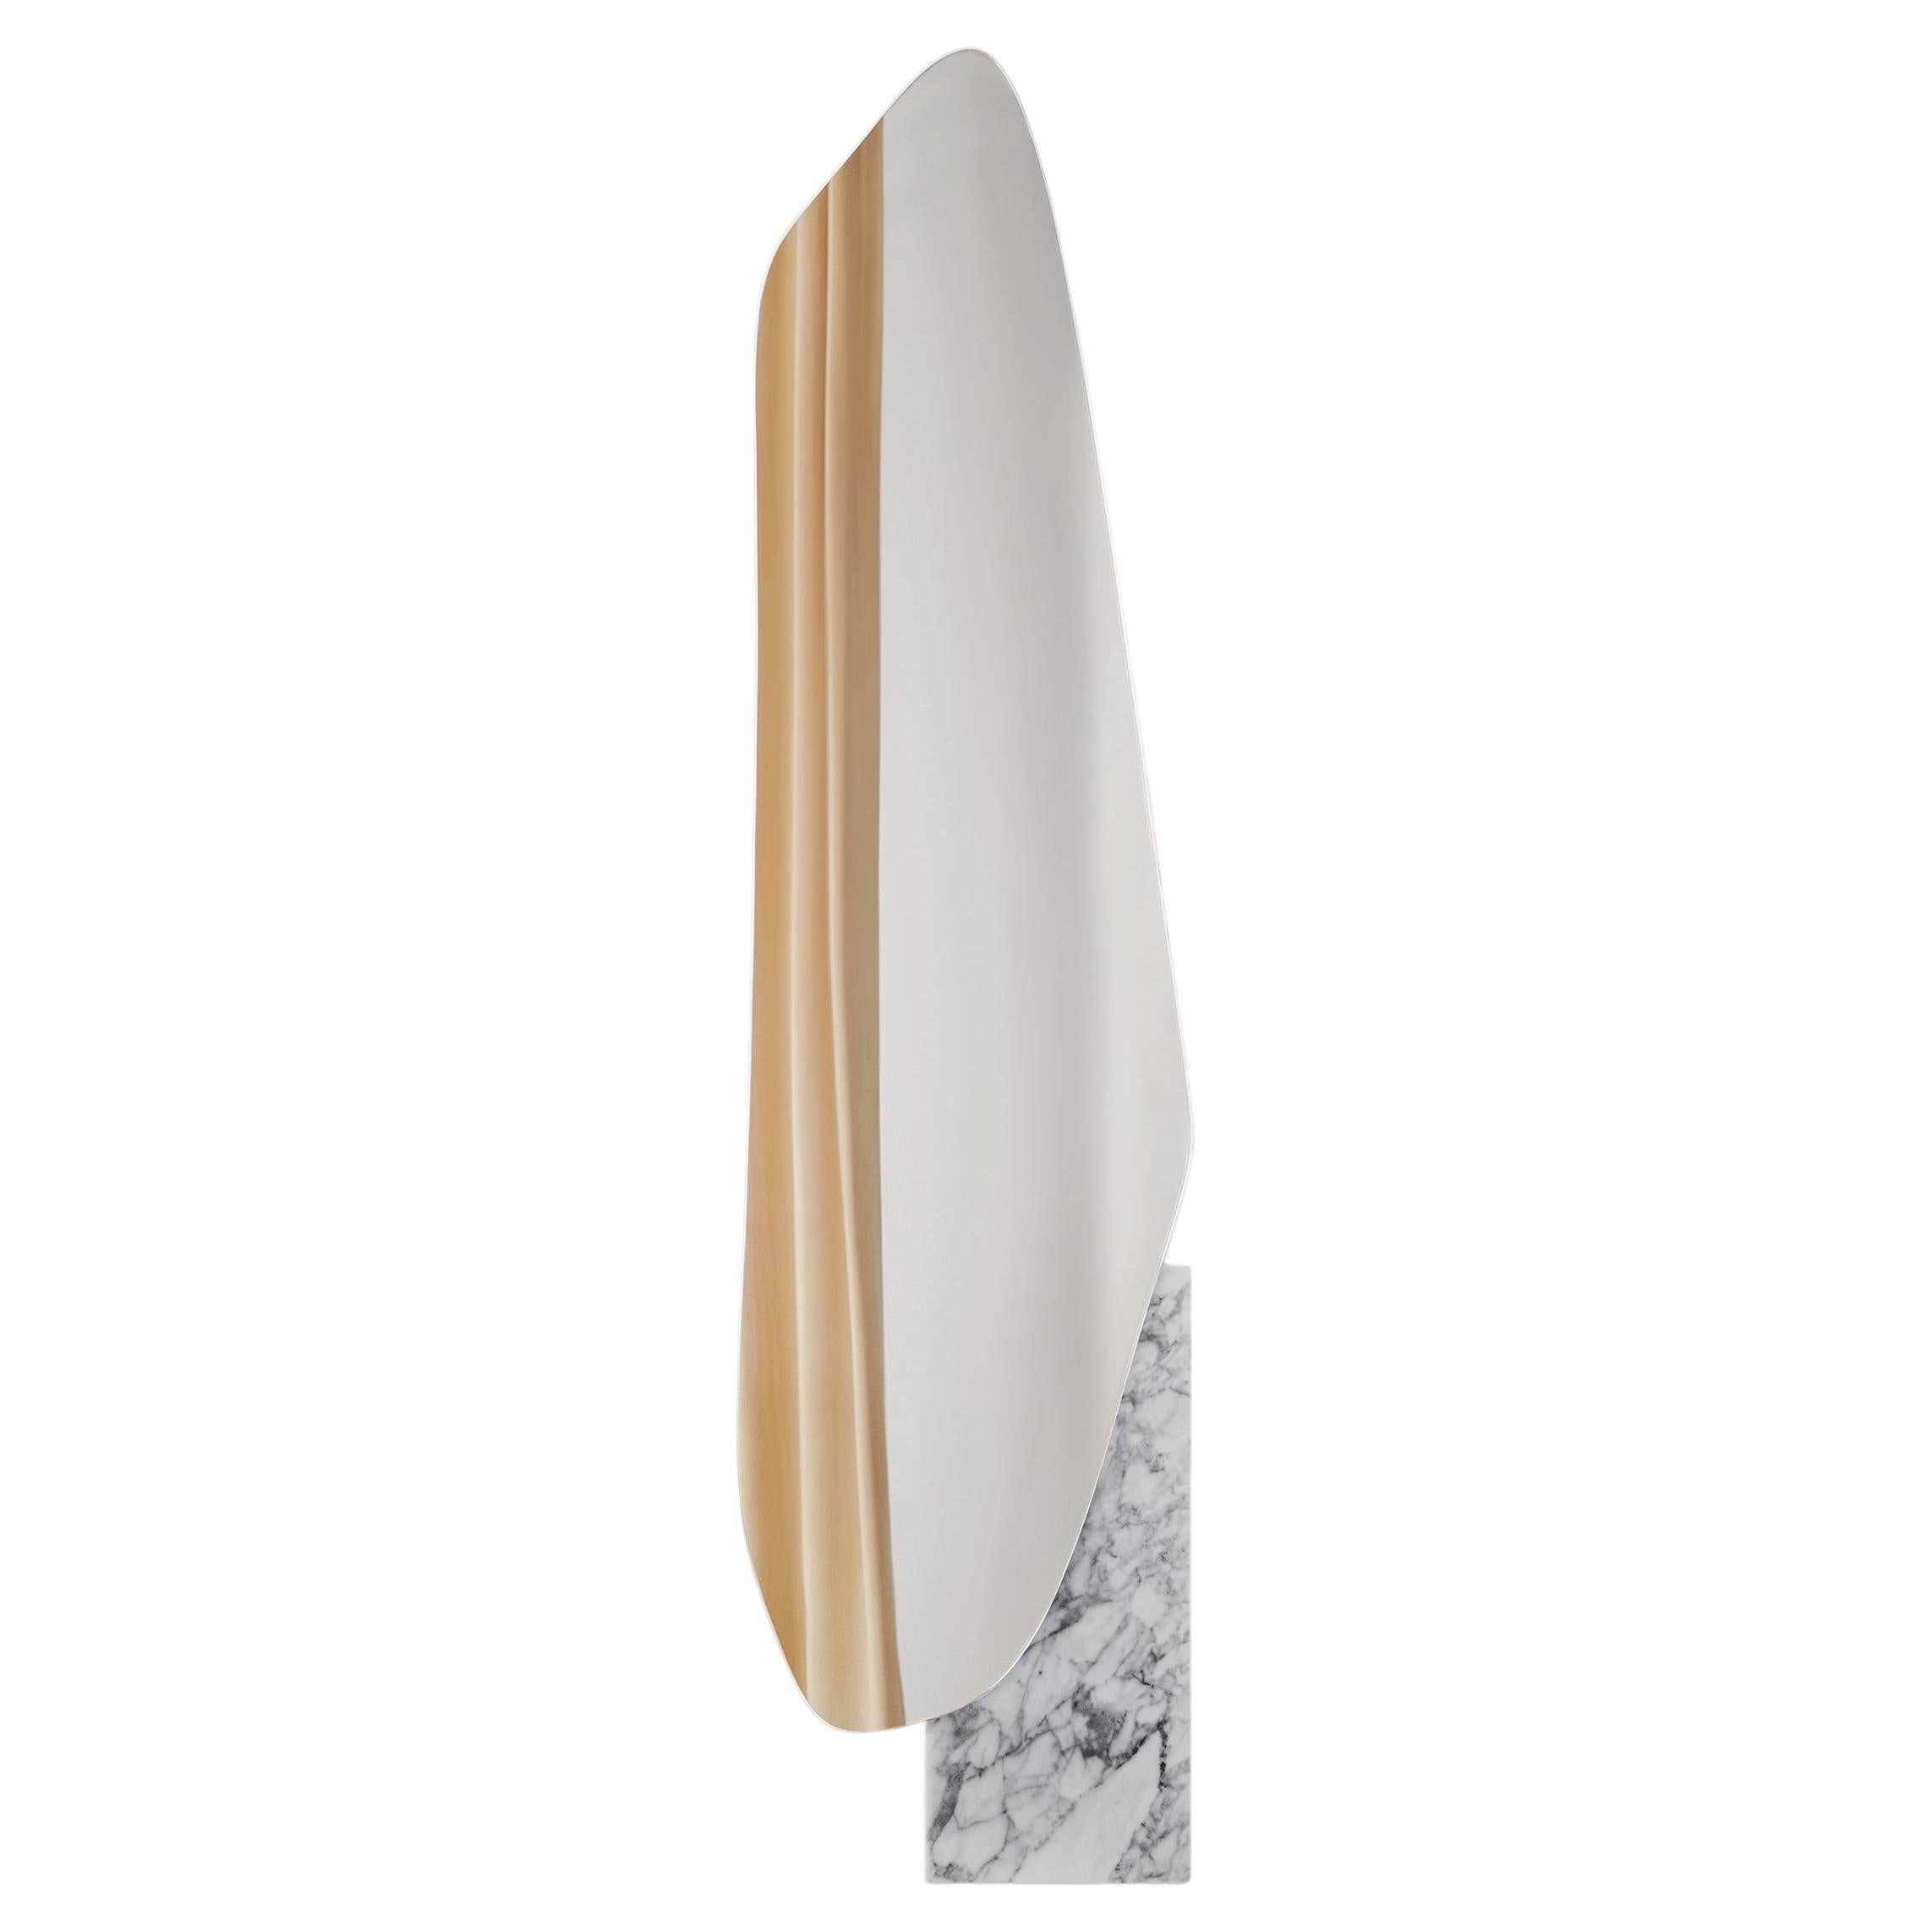 Contemporary Wall Mirror 'Lake 2' by Noom, White Marble